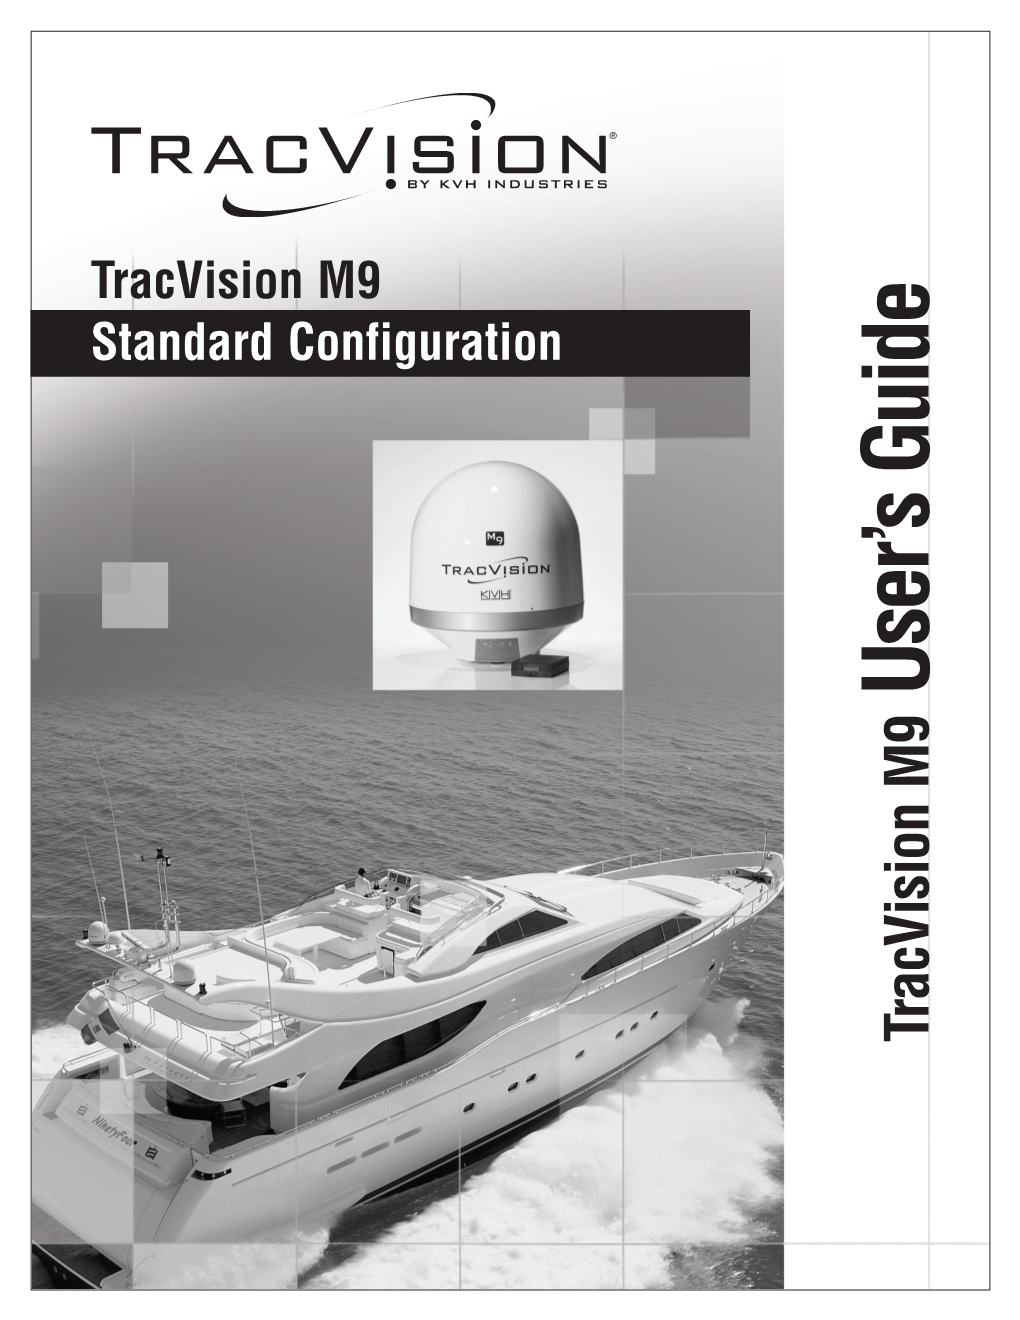 Tracvision M9 User's Guide